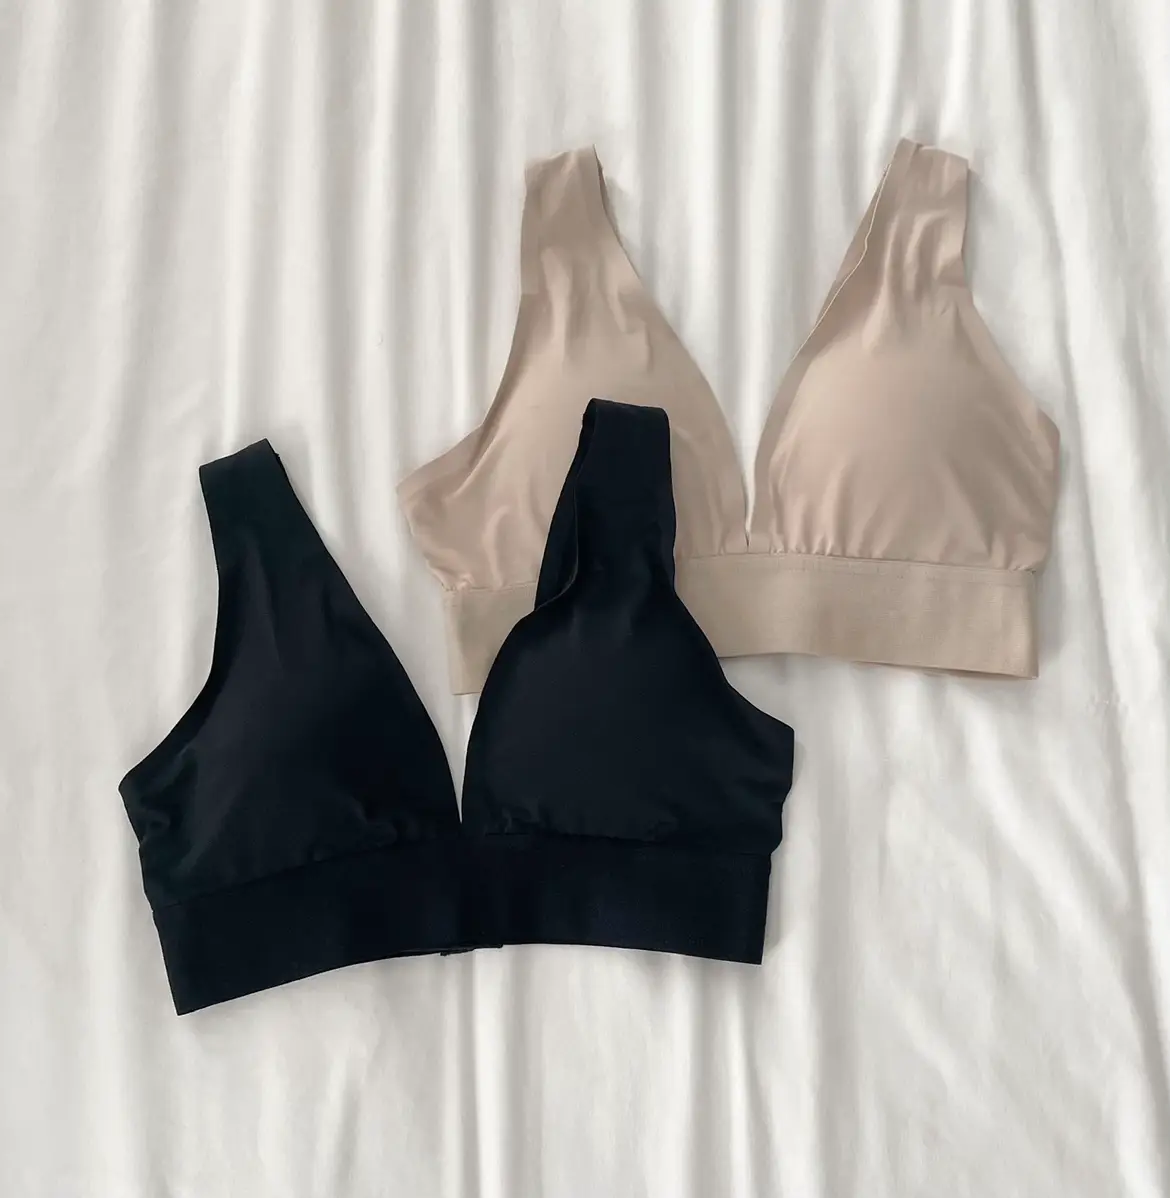 HUNKEMÖLLER ISABELLE BRA REVIEW 👙, Gallery posted by Robyn Baillie